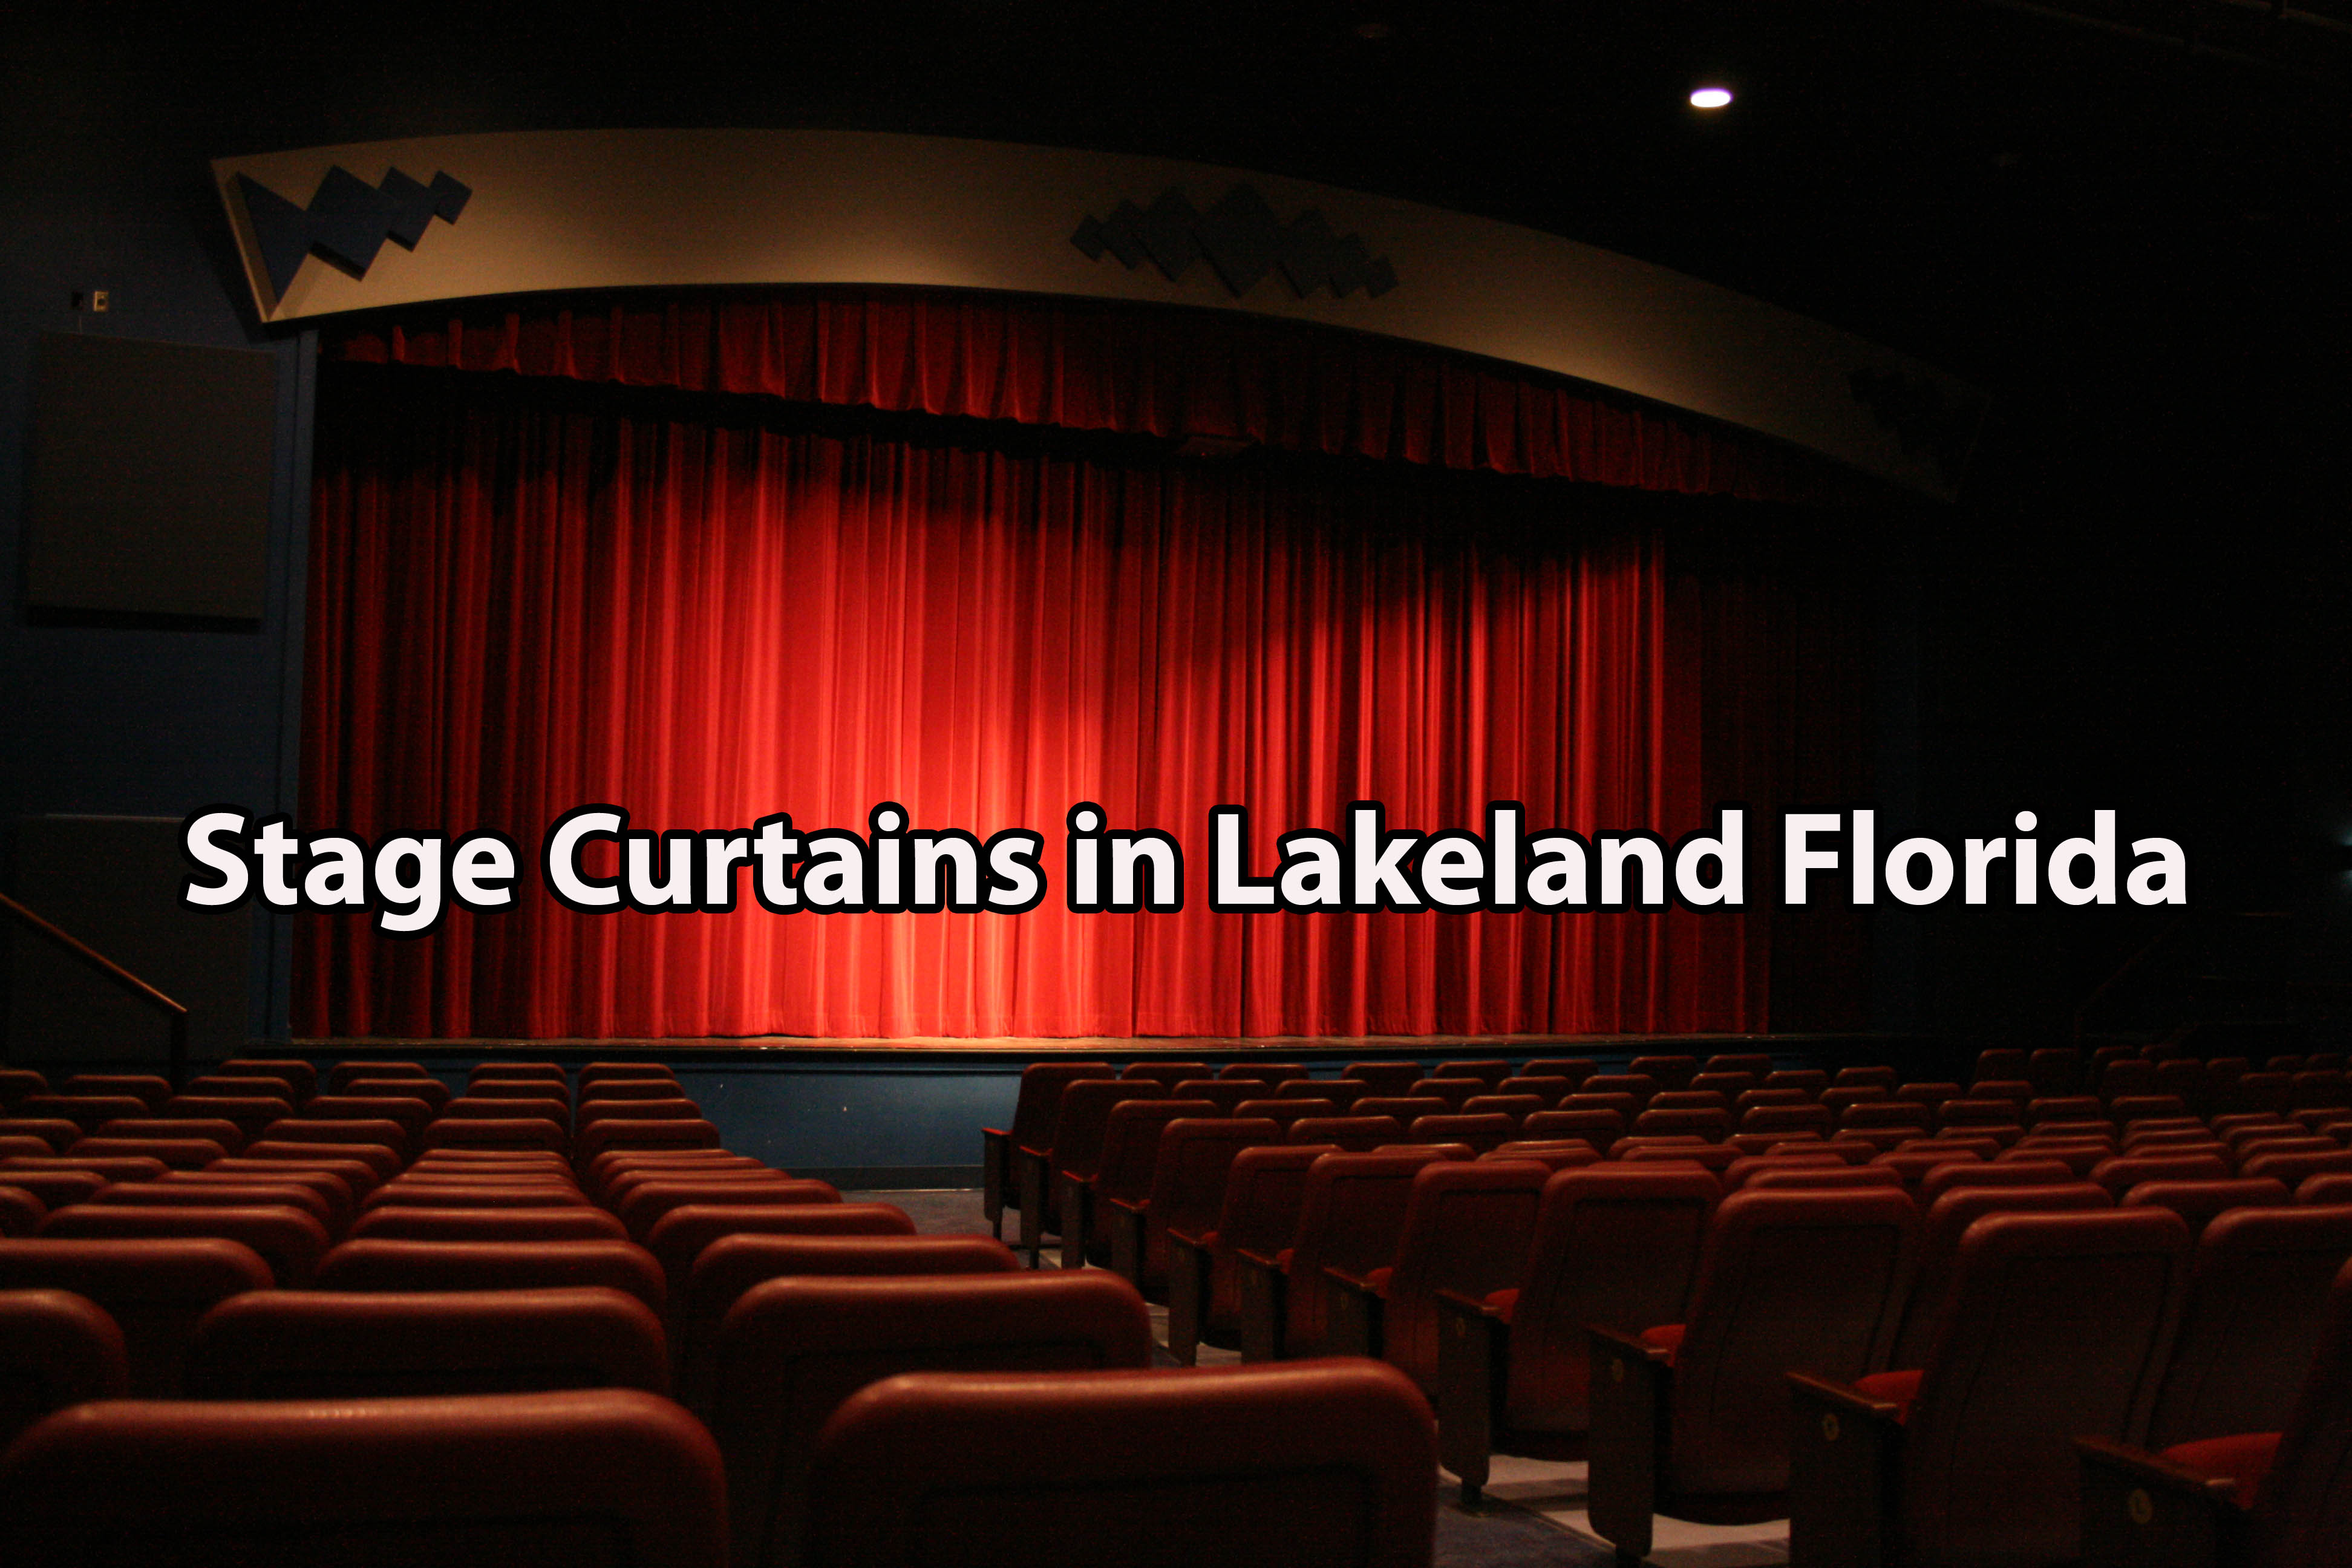 Stage Curtains in Lakeland Florida